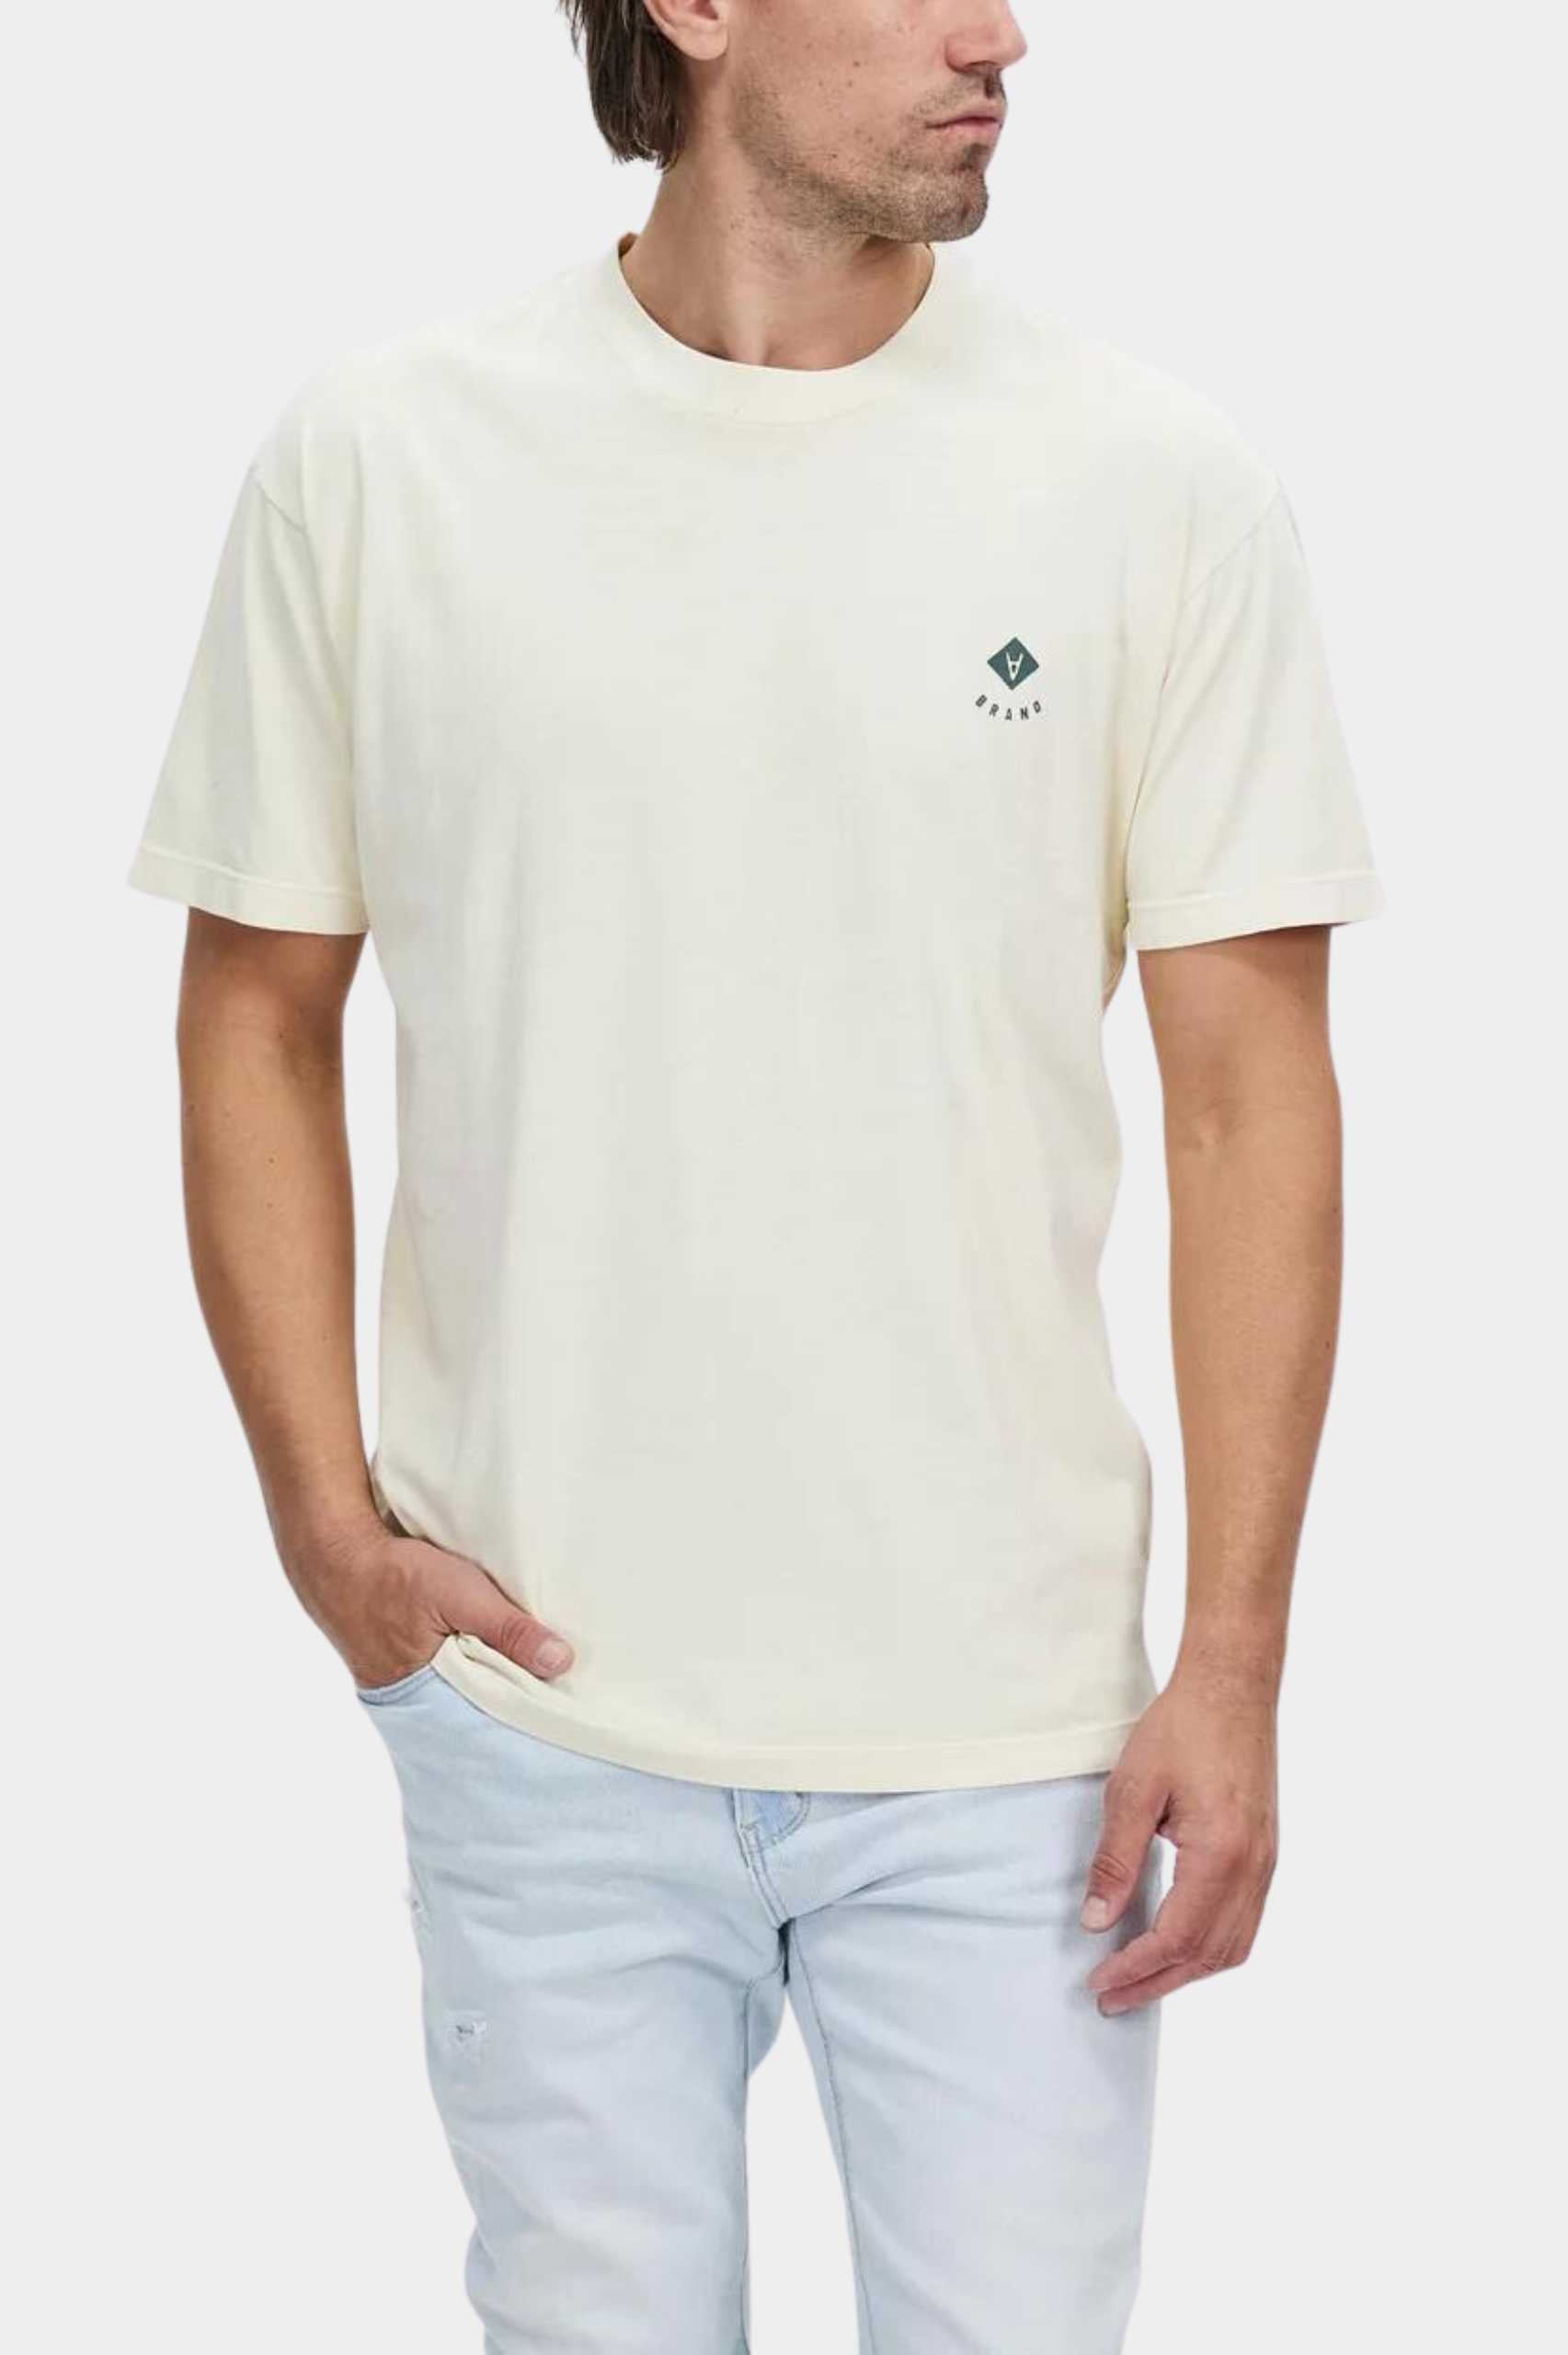 Abrand A Dropped Tee in Off White